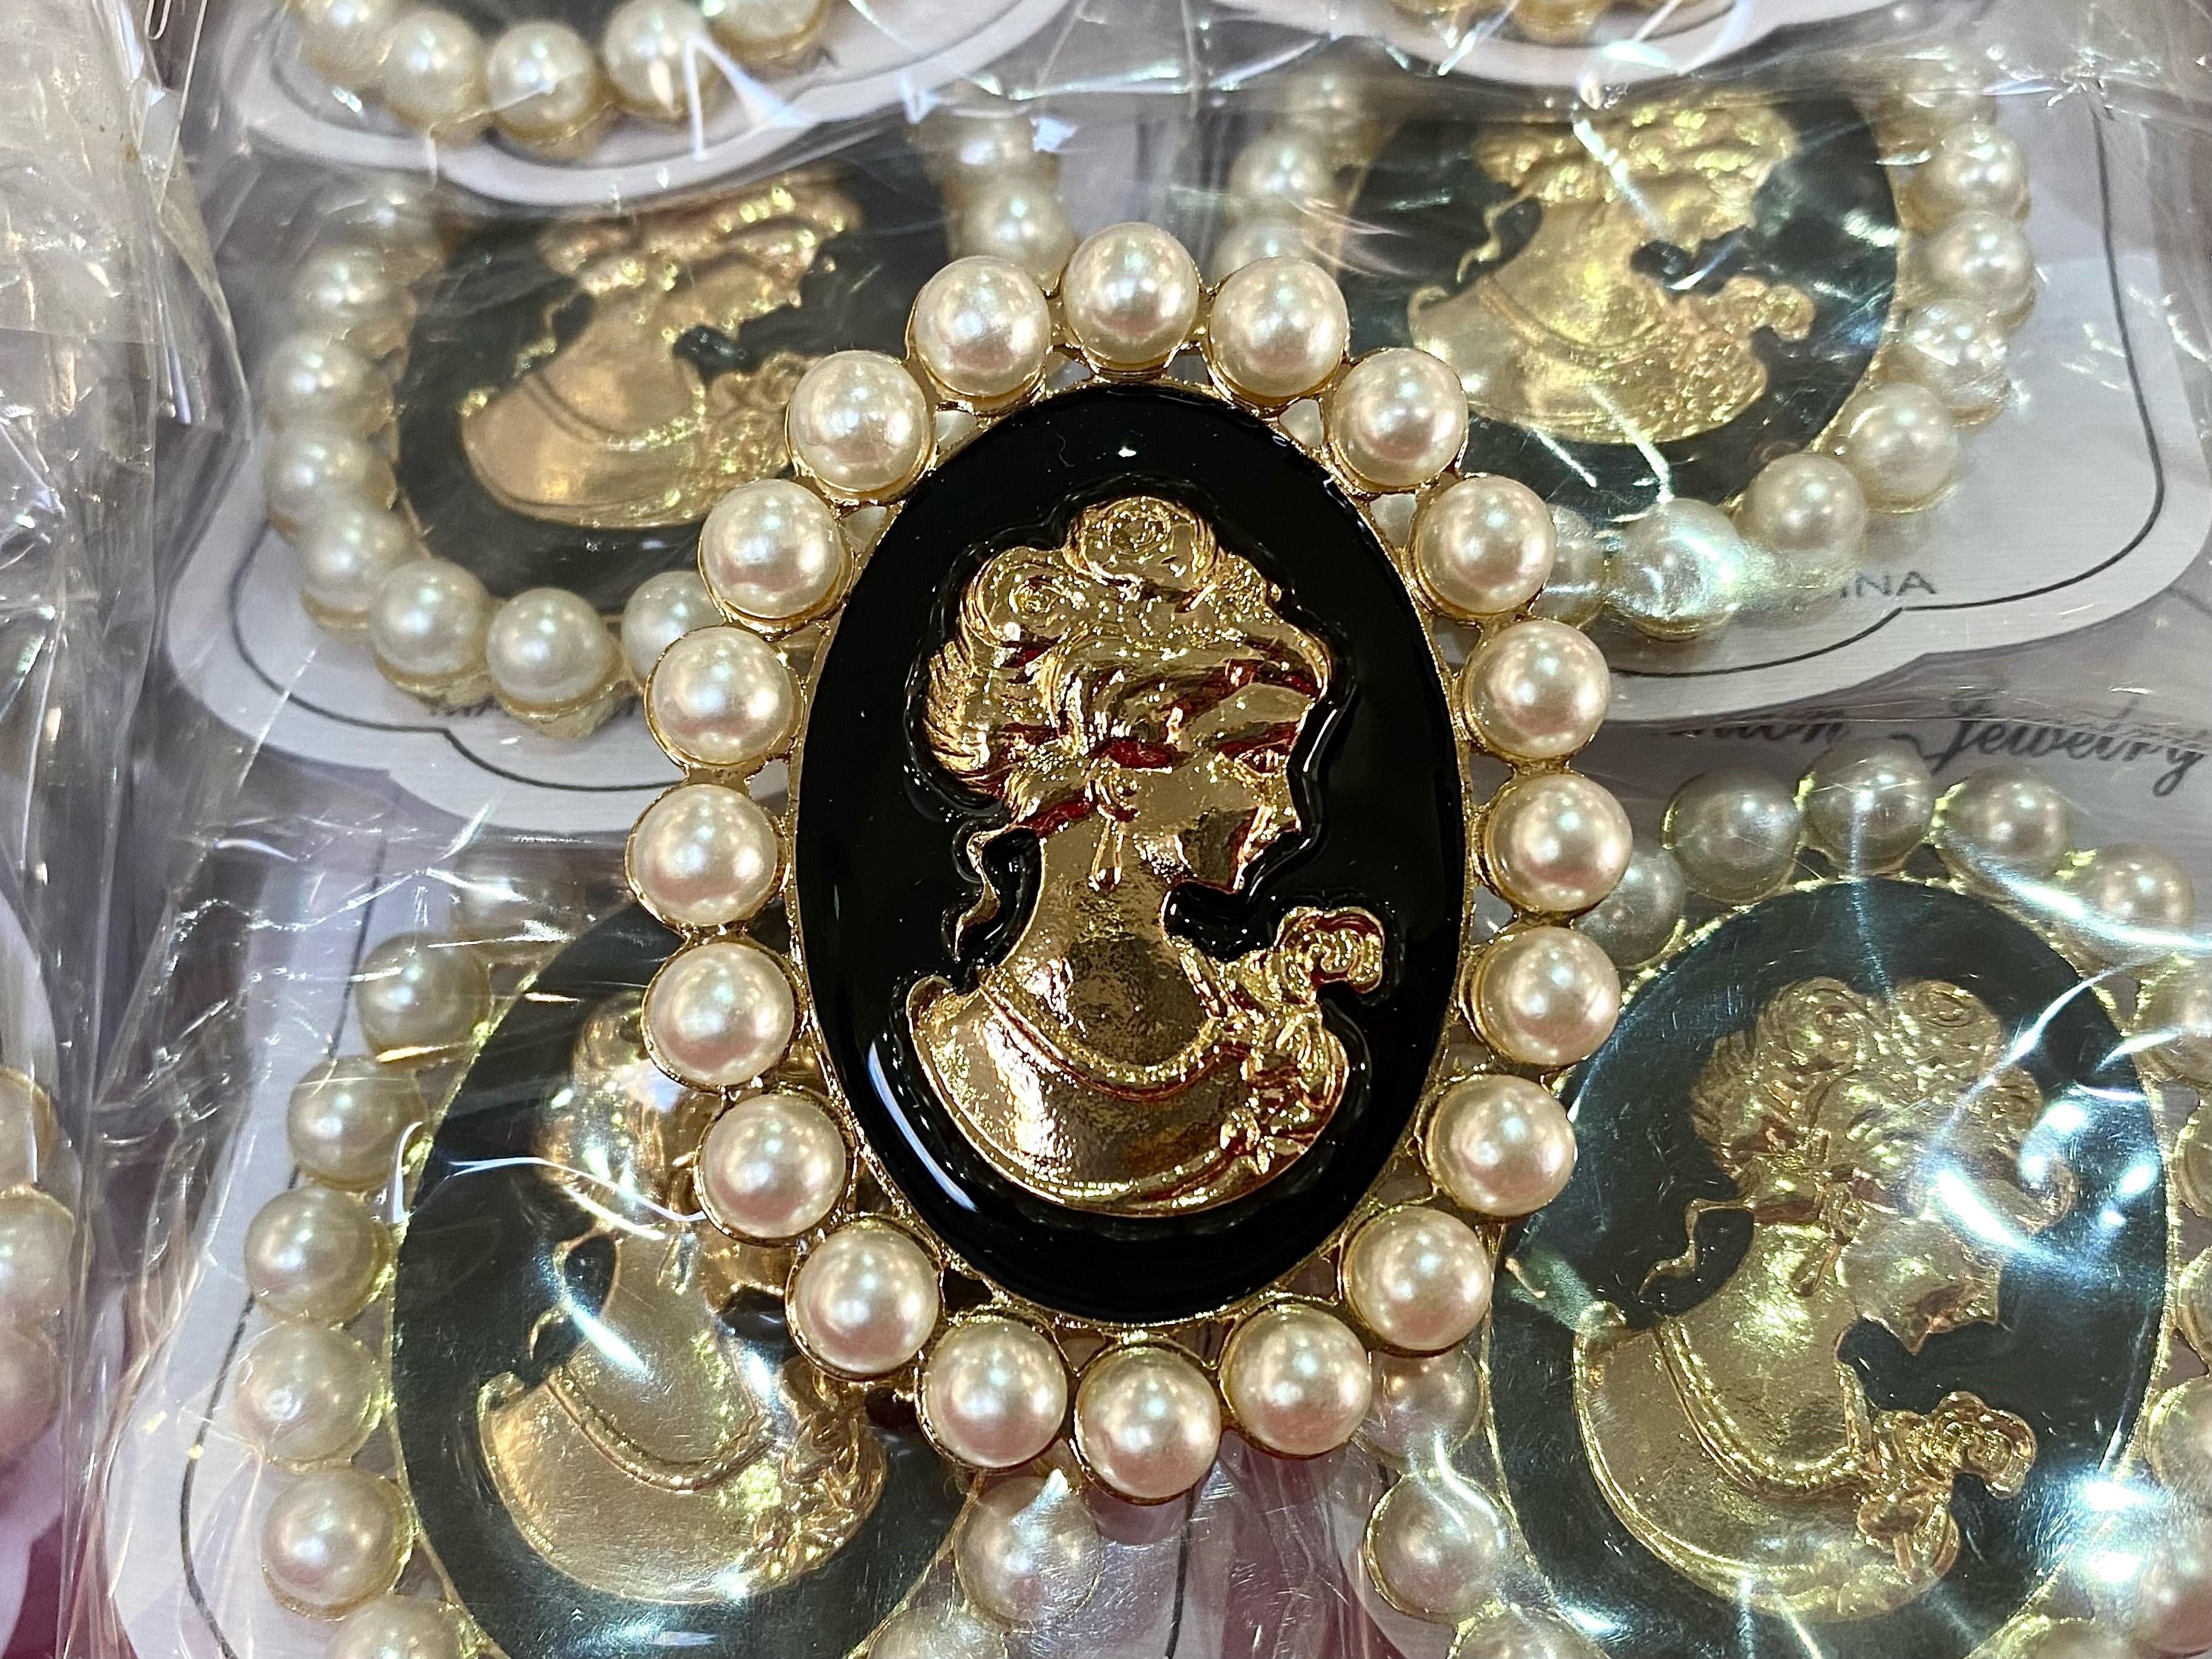 Haberdashery Interest - Box of Pearl Trimmed Cameo Brooches, in black and gold, ideal for crafting,